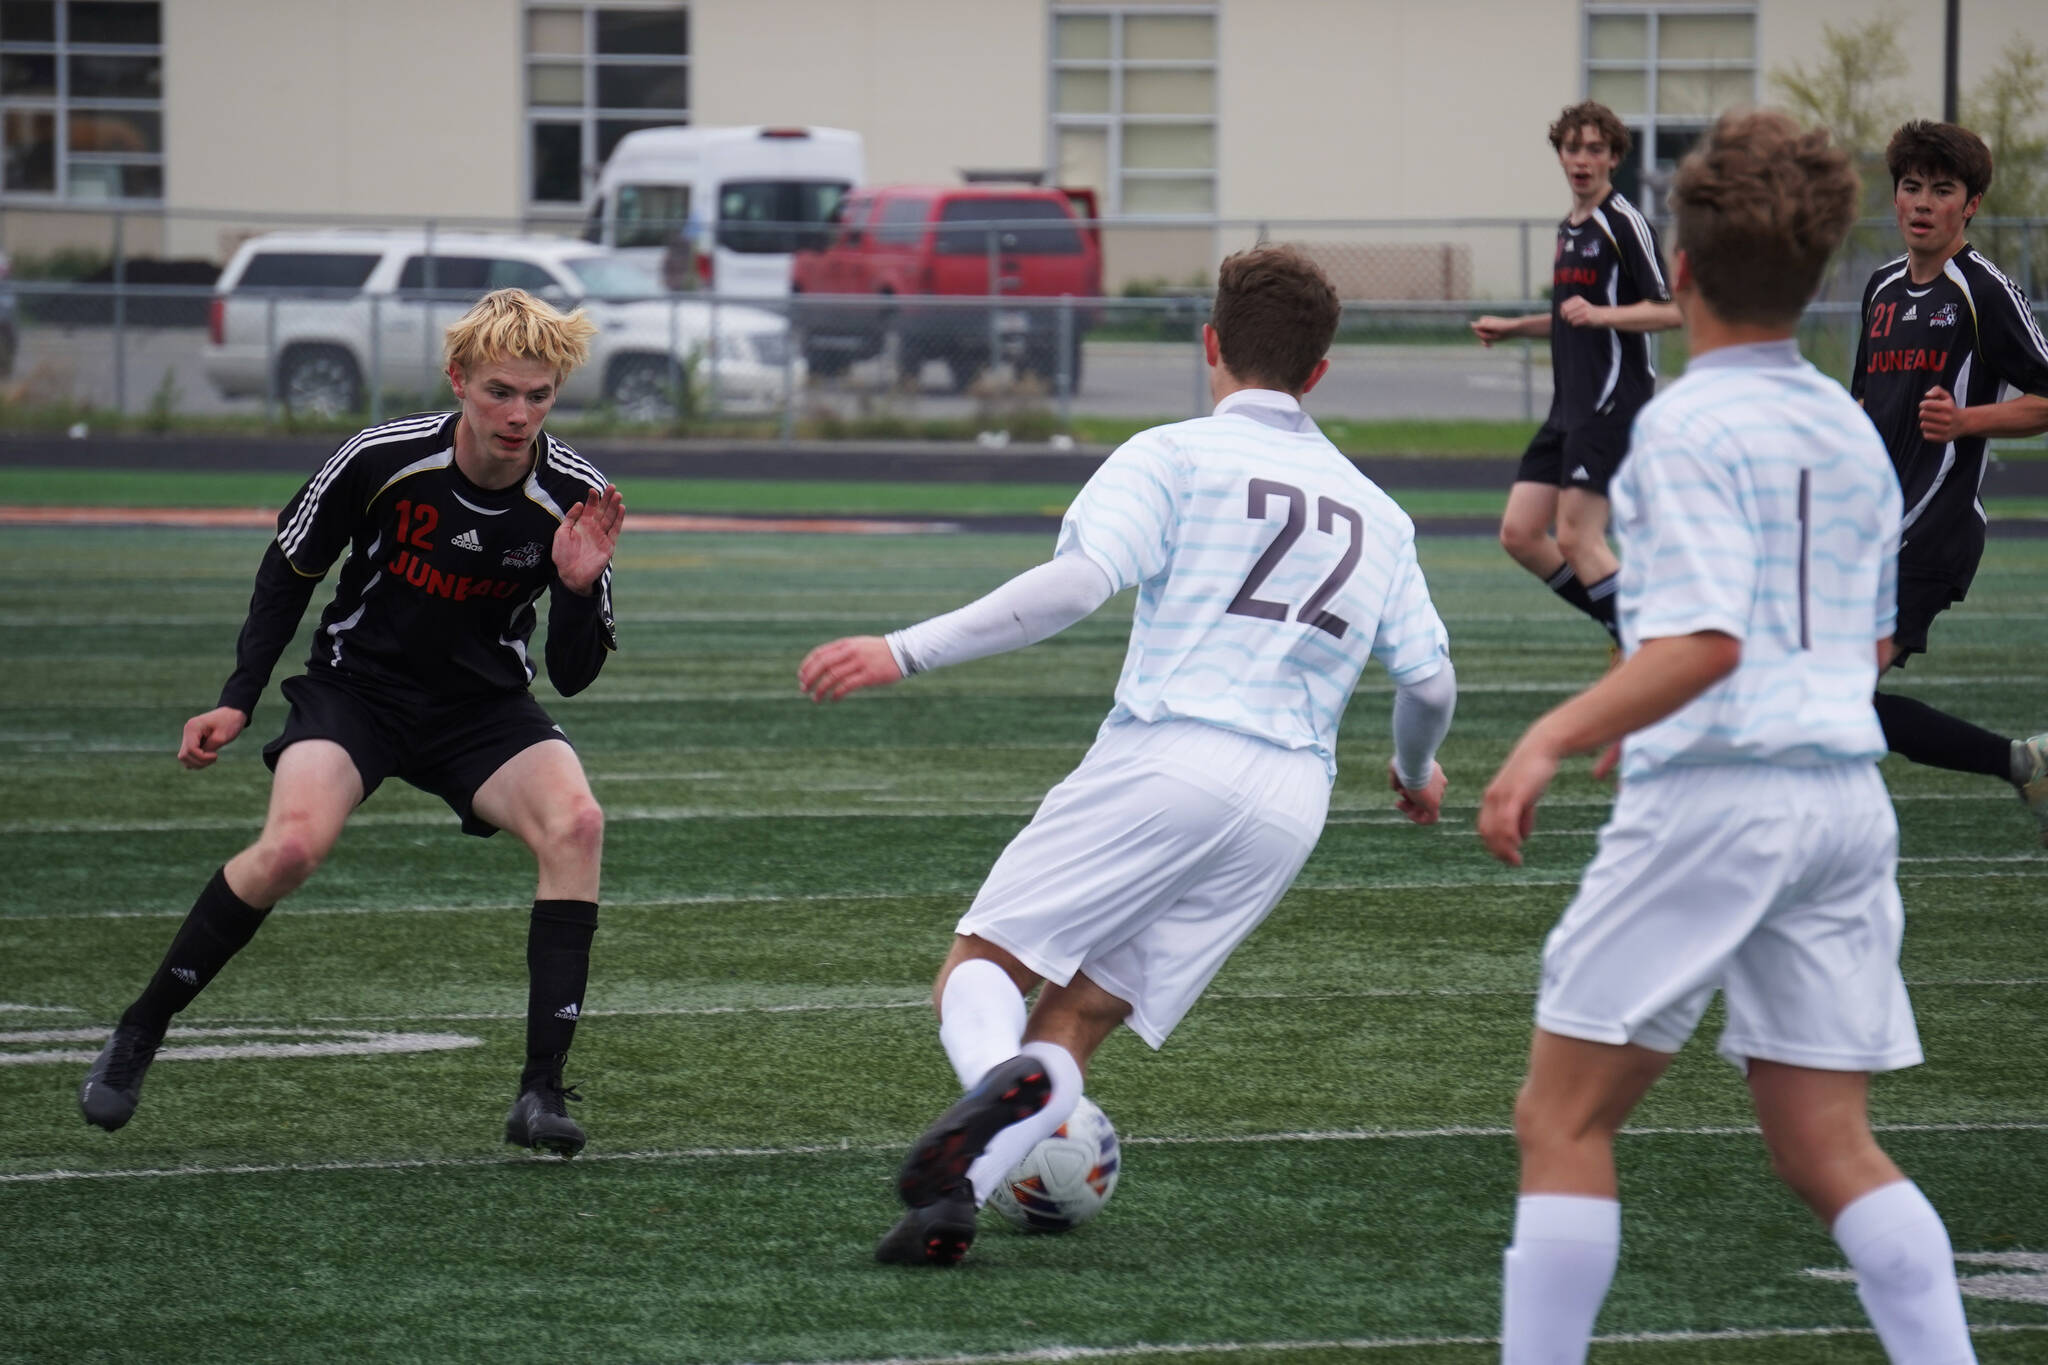 Juneau-Douglas’ Will Robinson moves to attack the ball, under the control of Soldotna’s Zachary Buckbee, during the Division II Soccer State Championship on Saturday, May 27, 2023, at West Anchorage High School in Anchorage, Alaska. (Jake Dye/Peninsula Clarion)